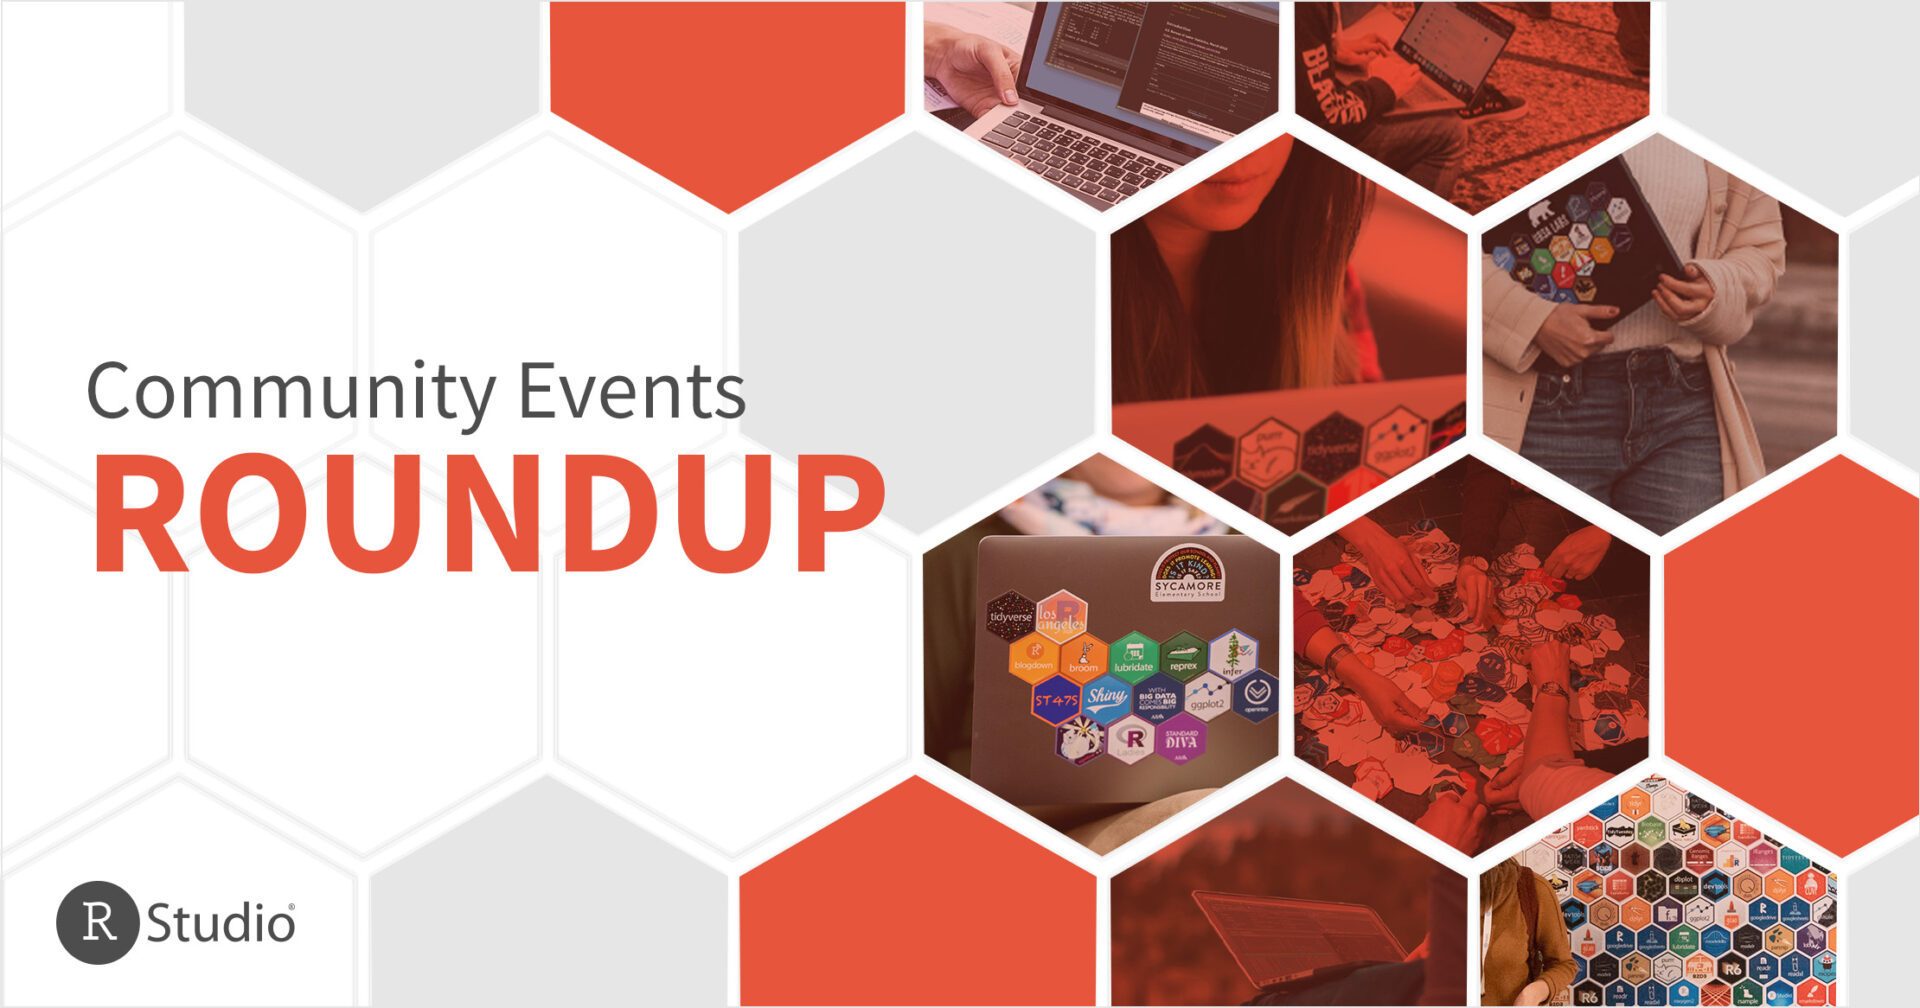 Text says Community Events Roundup. On the right-hand side, there are hexes embedded with images of laptops, hex stickers, and people. The RStudio logo is on the bottom left.